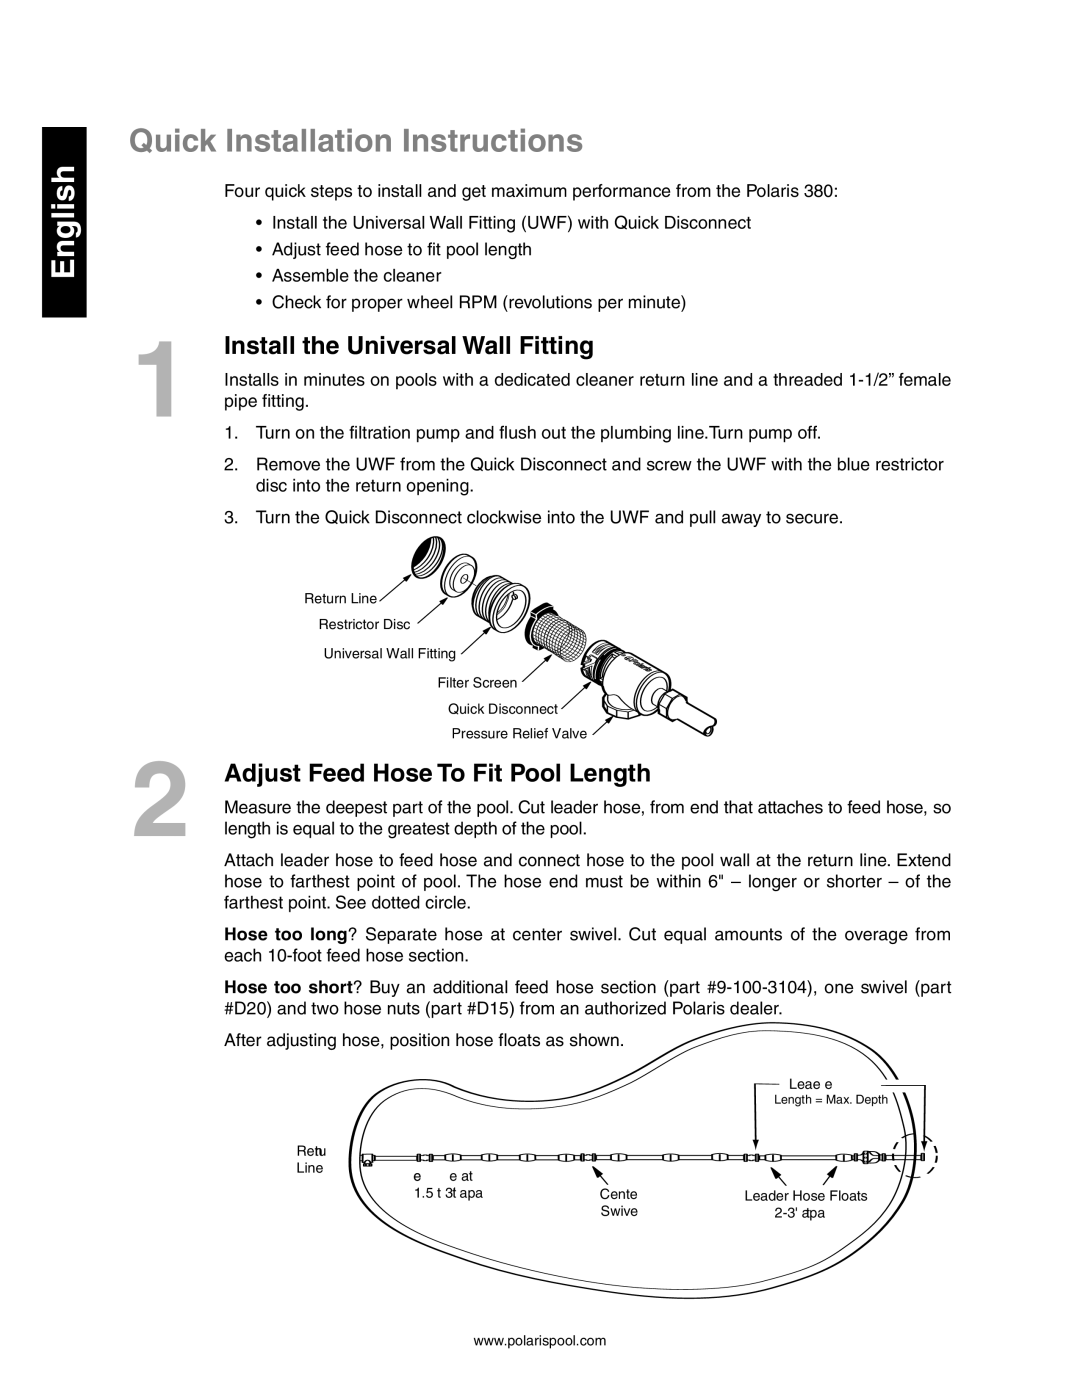 Polaris 380 owner manual Quick Installation Instructions, Install the Universal Wall Fitting, English 